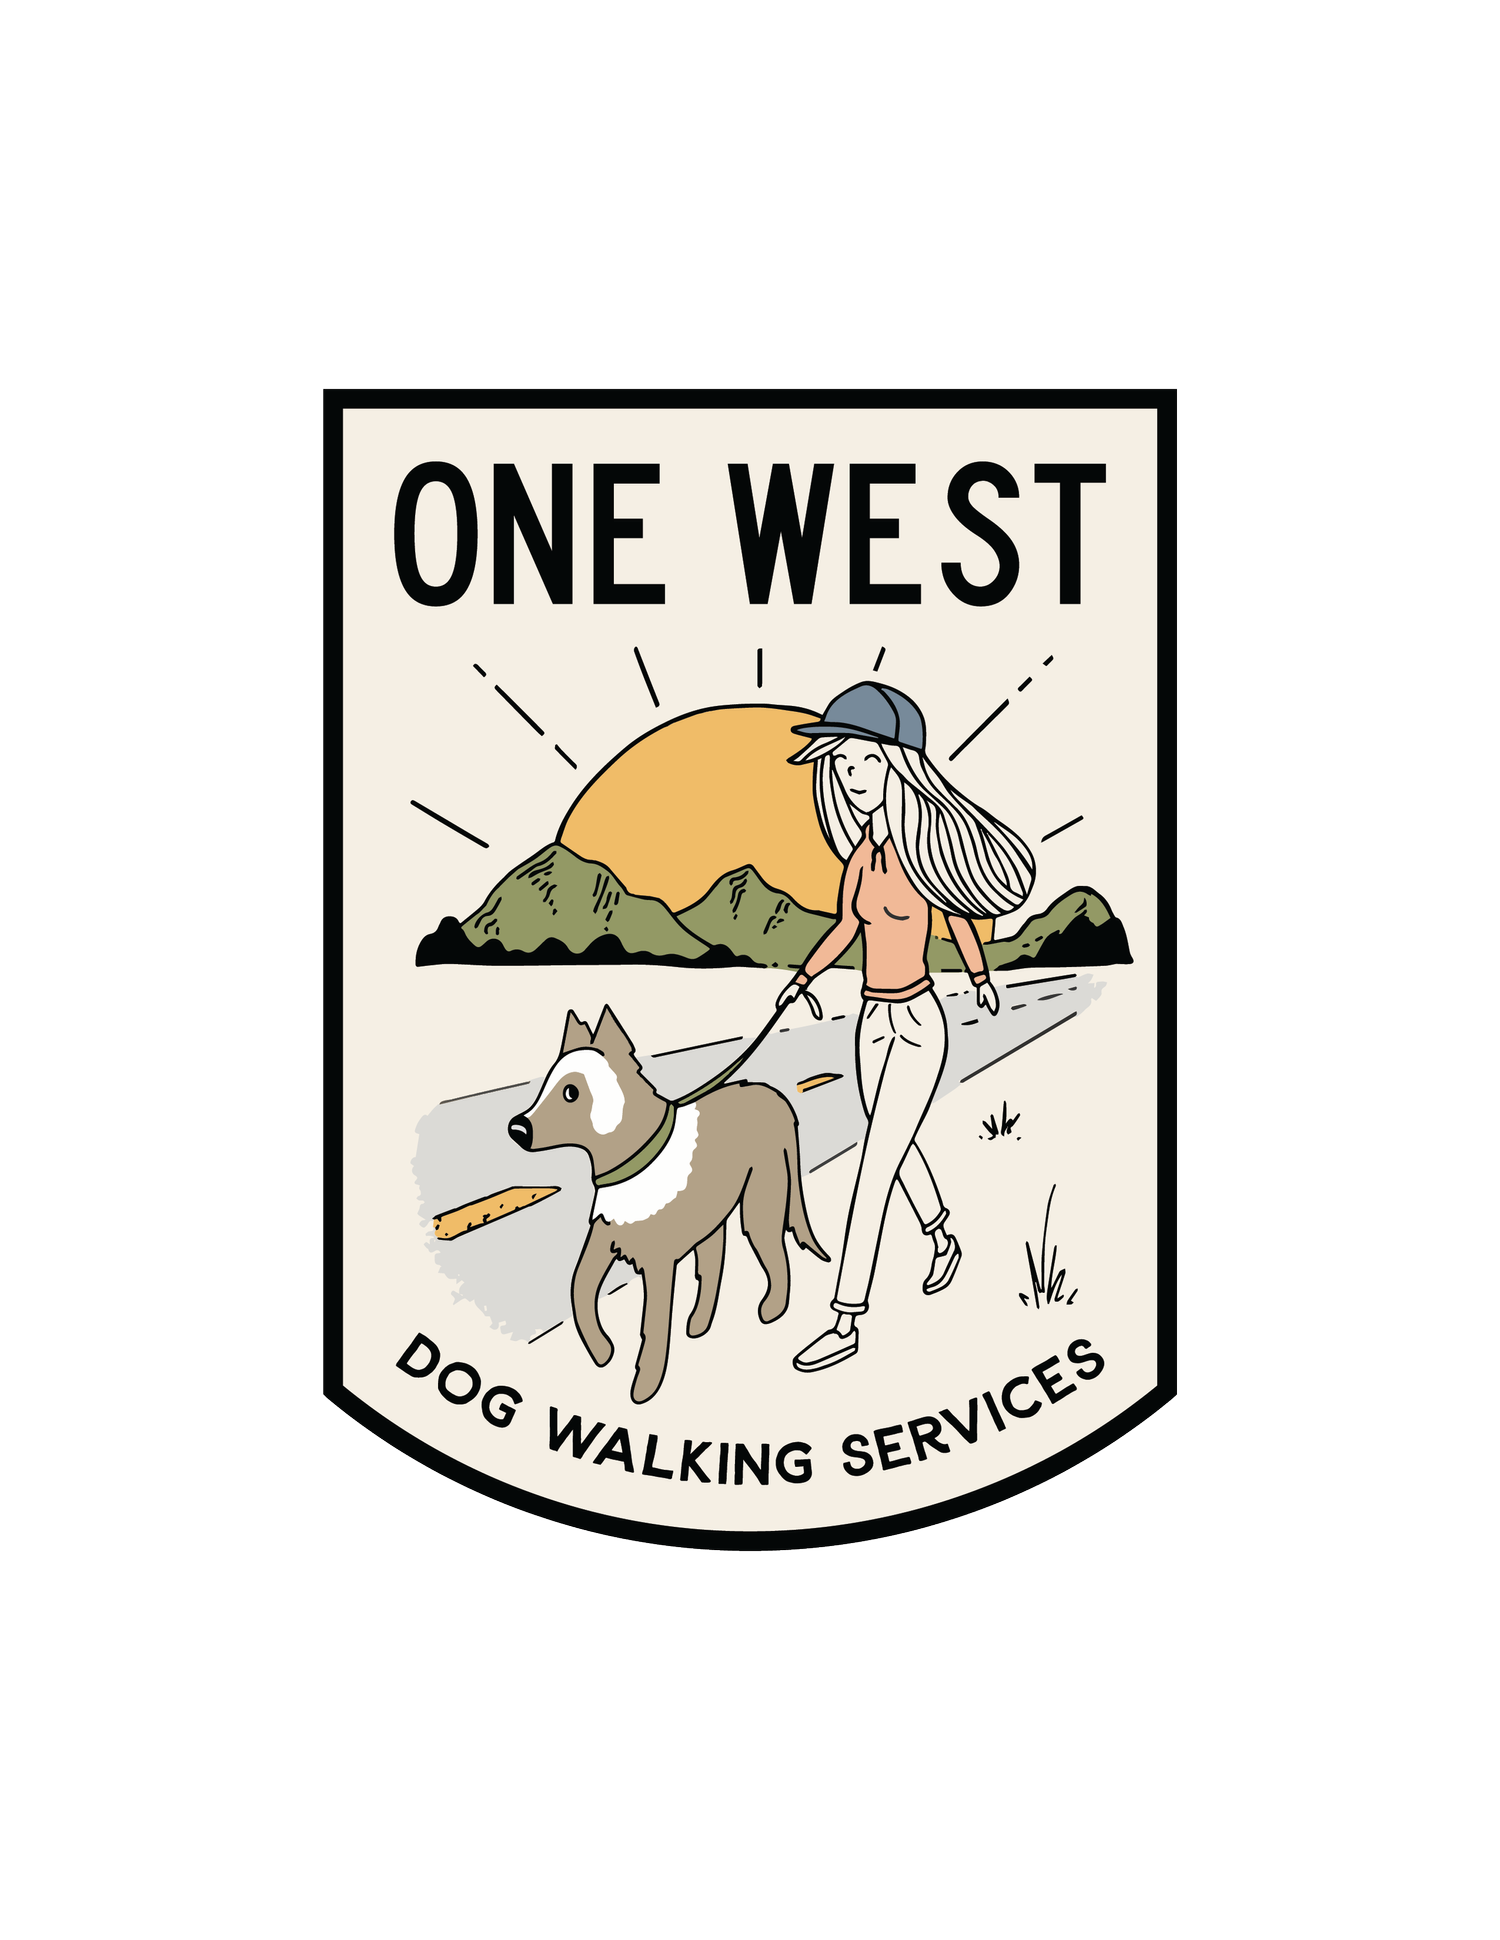 One West Dog Walking Services